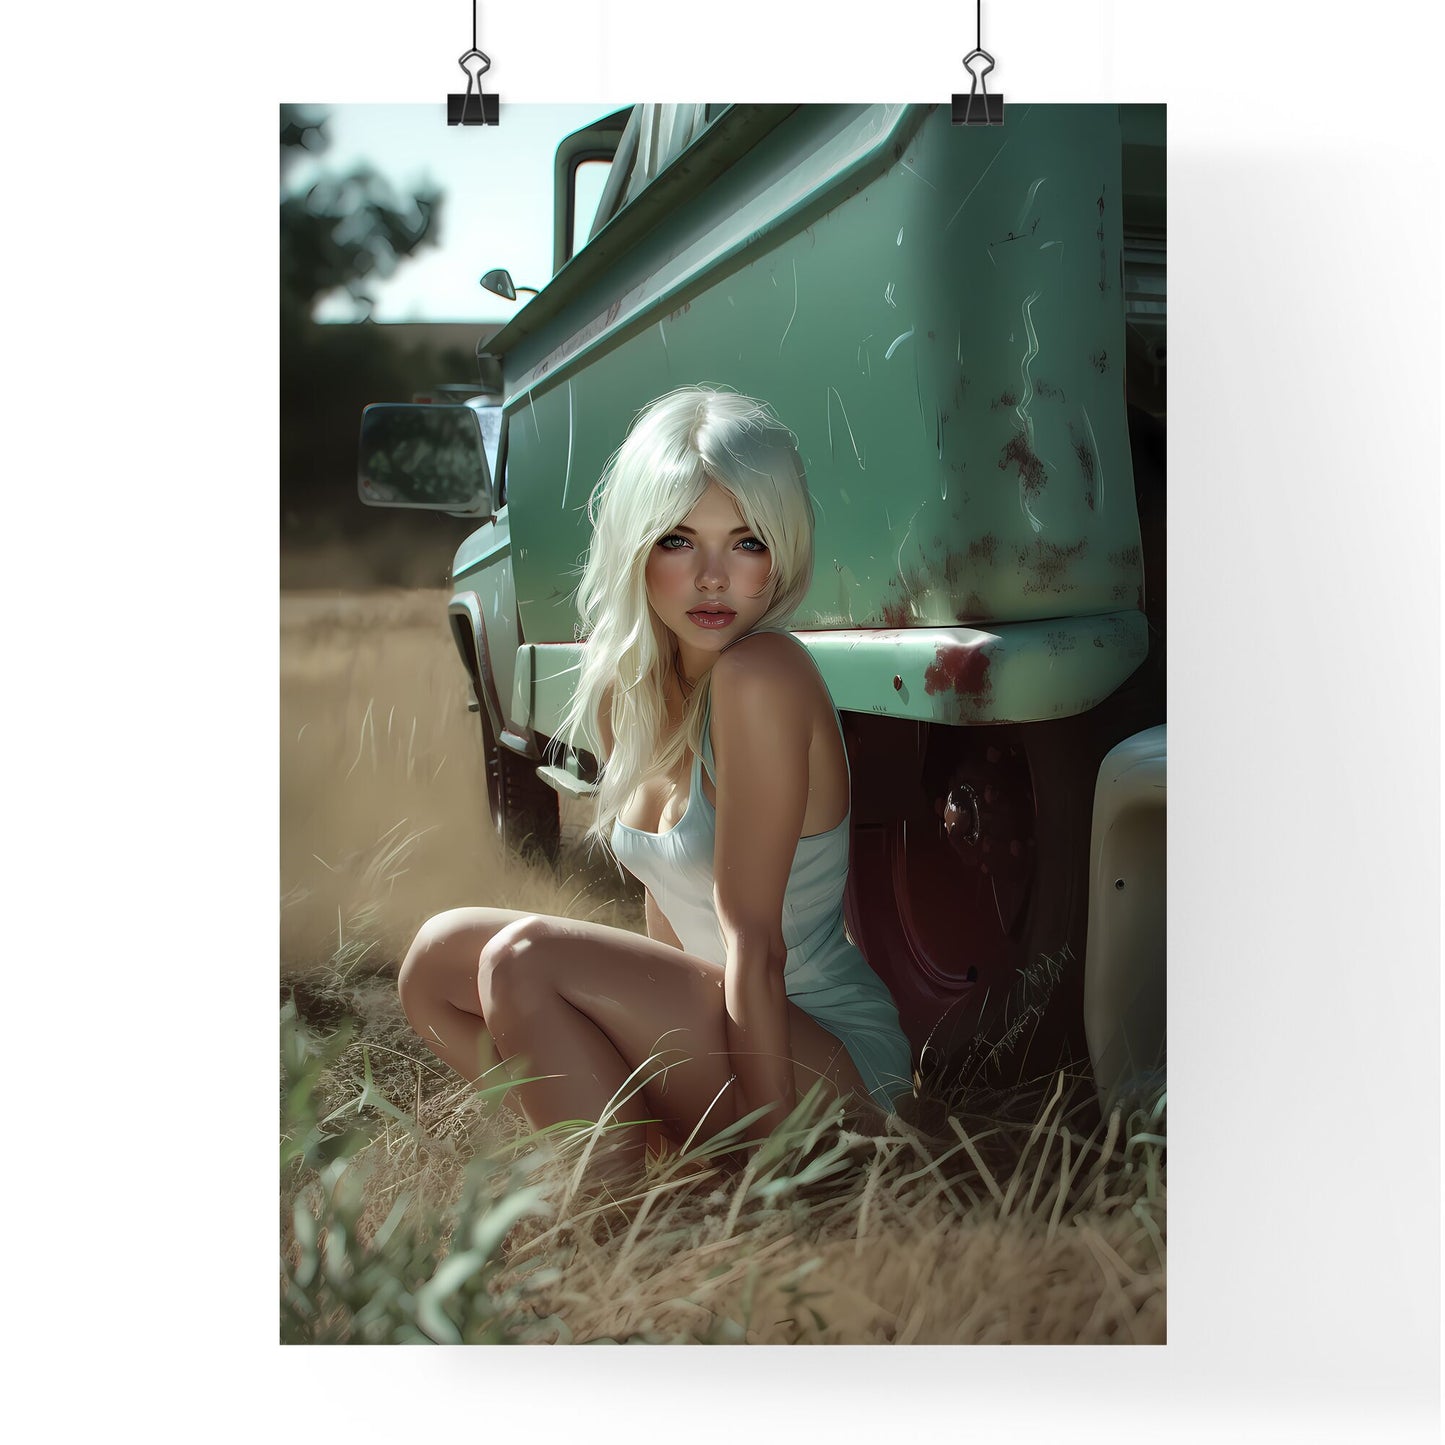 Sitting pin up factory worker girl,looking amazing - Art print of a woman sitting in a field next to a green truck Default Title